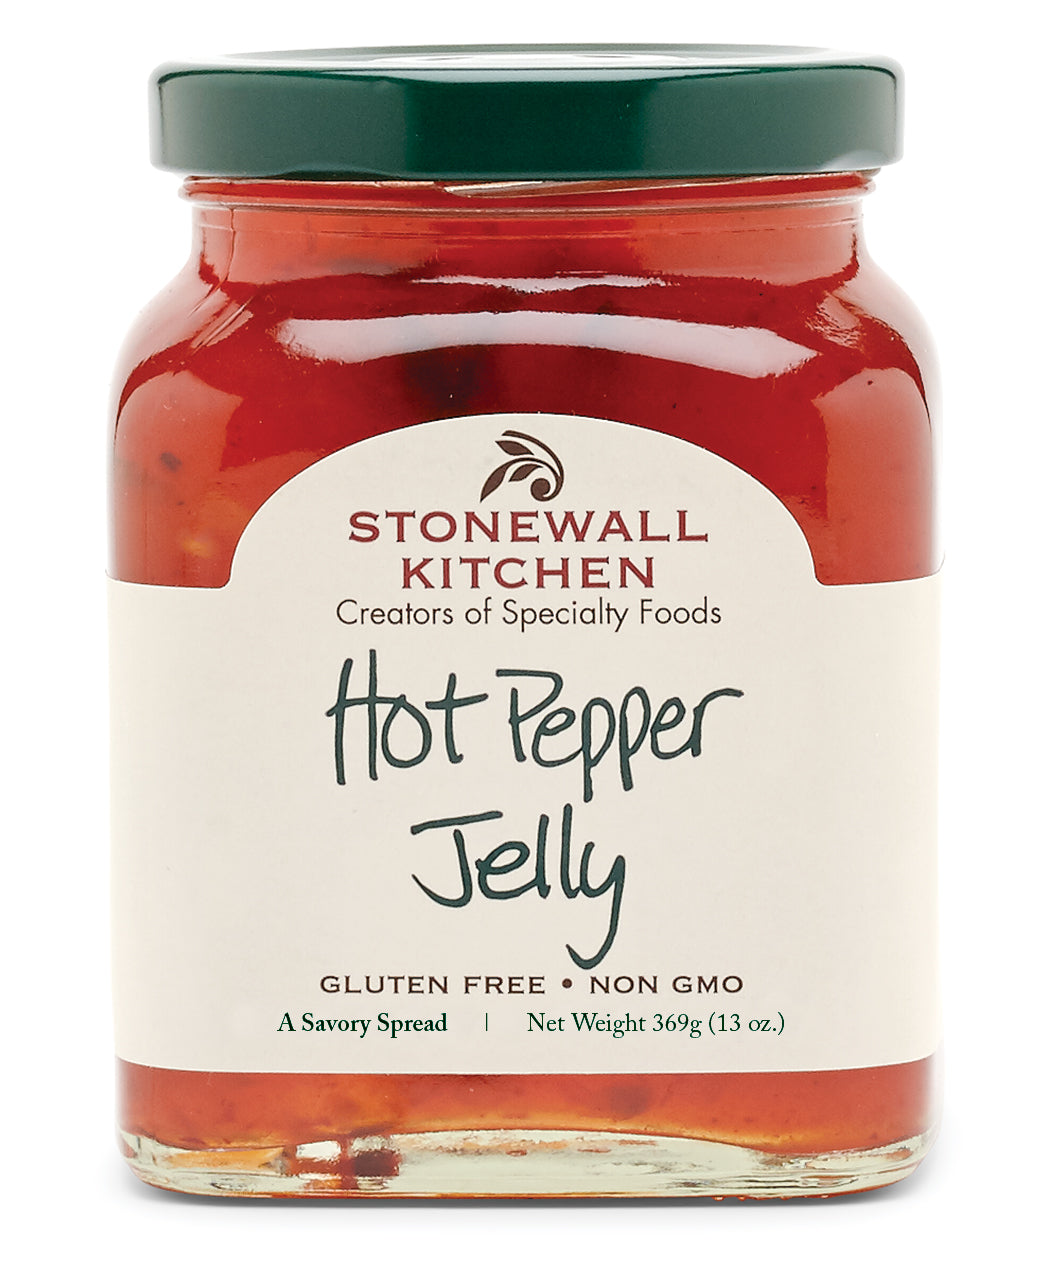 Stonewall Kitchen Hot Pepper Jelly - Olive Oil Etcetera 